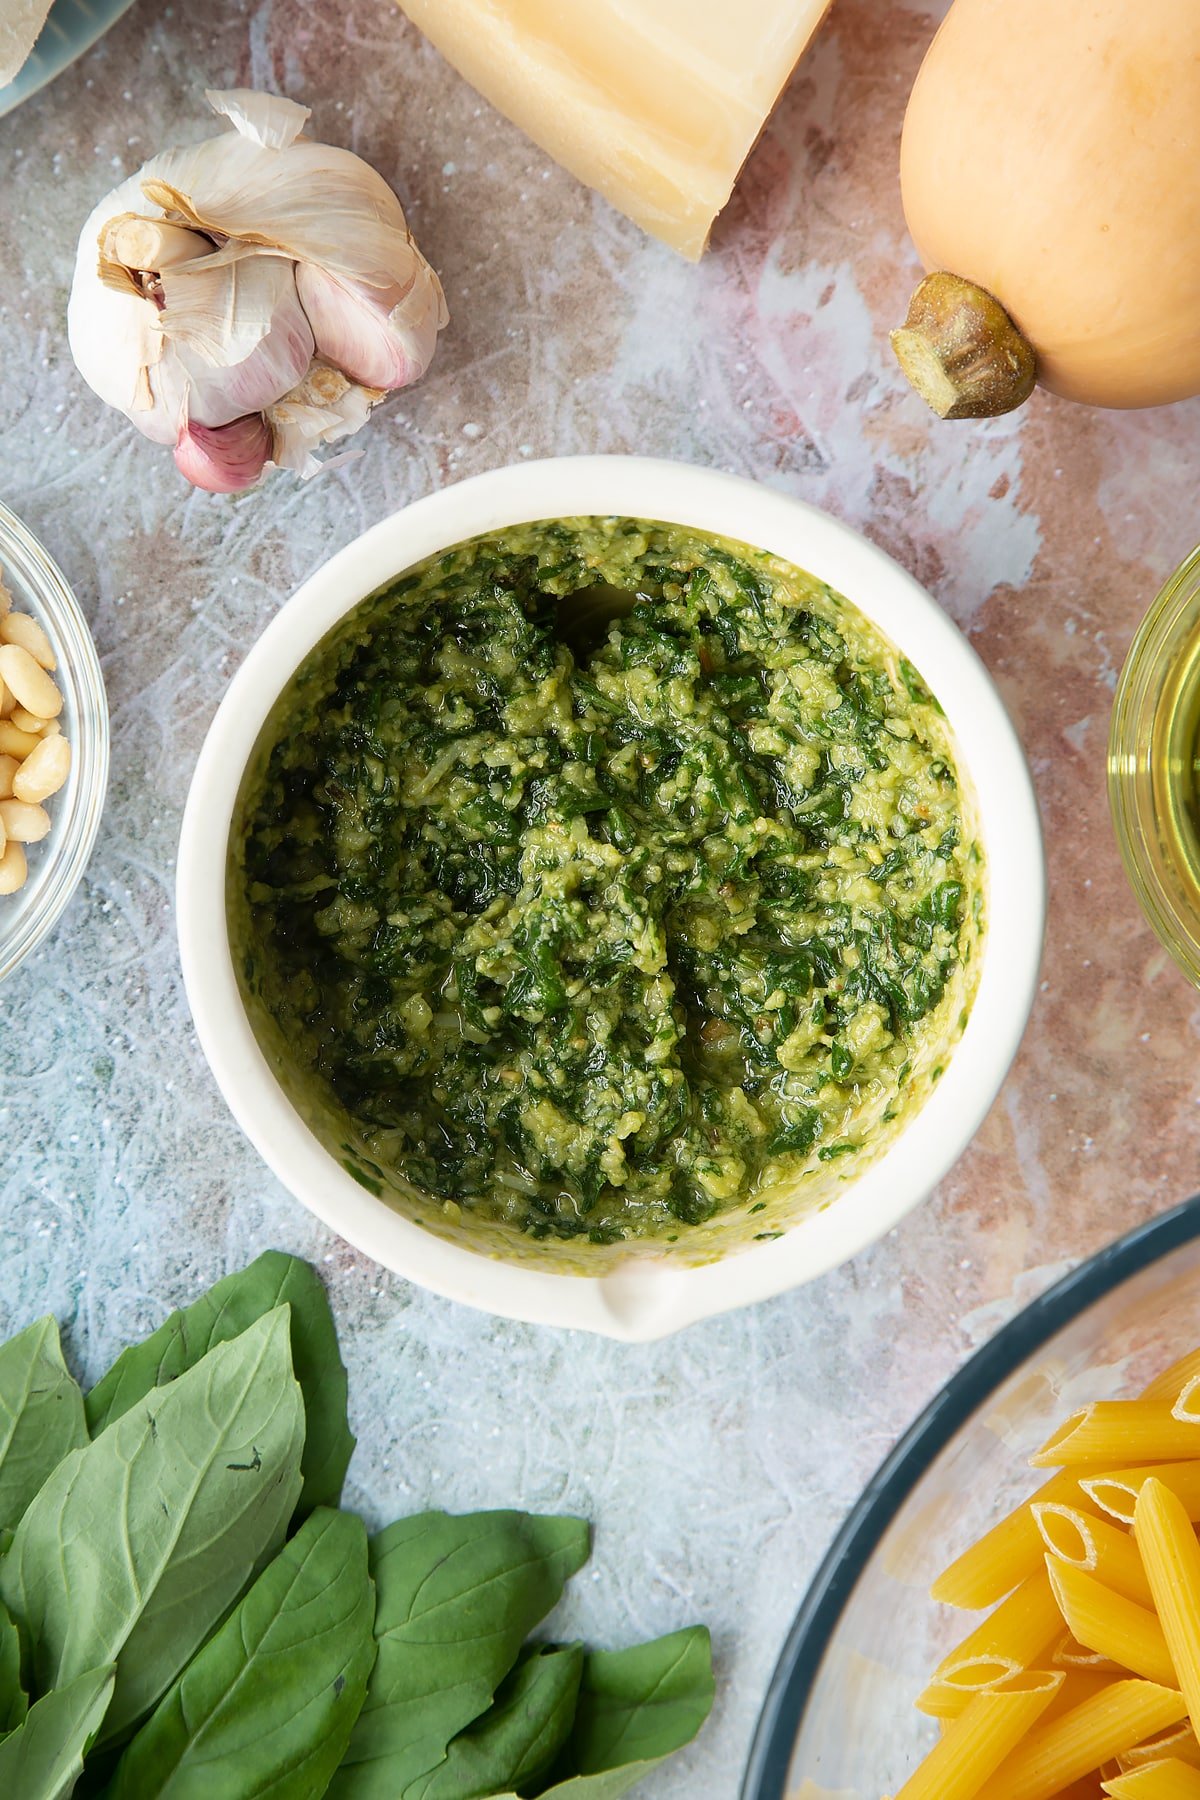 Freshly made pesto in a small mortar. Ingredients to make penne with butternut squash and goat cheese surround the mortar.